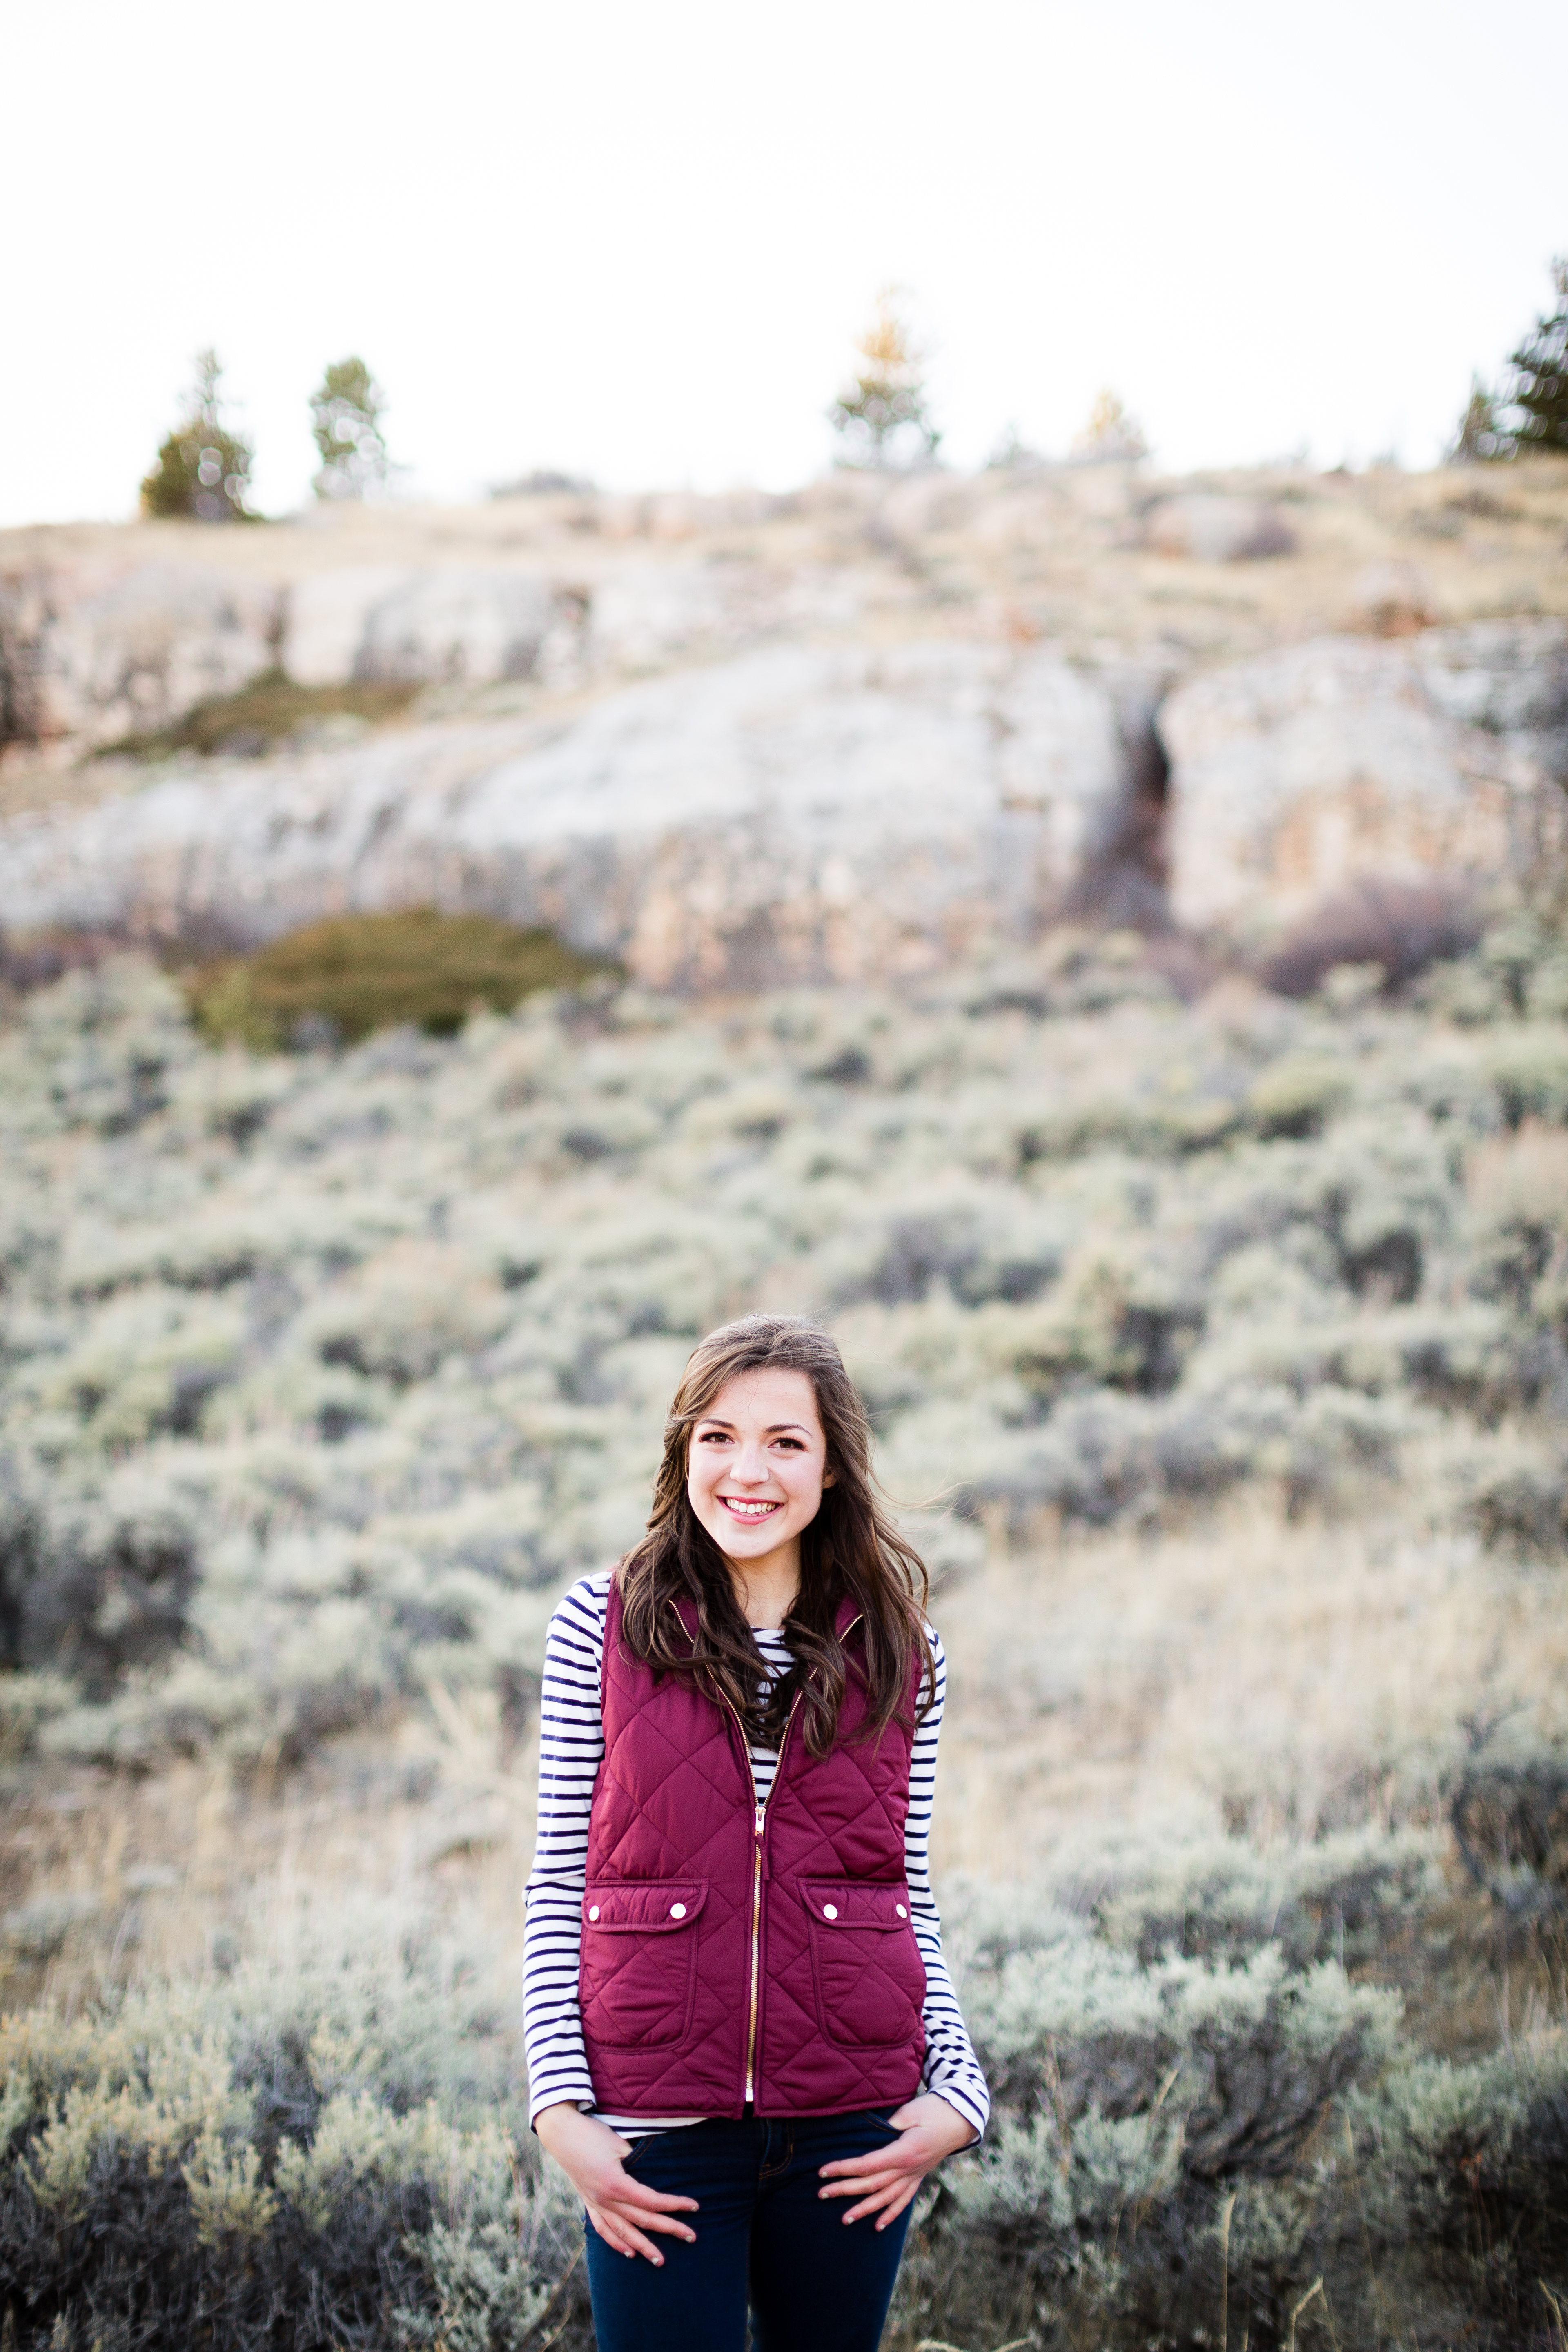 senior girl wearing a blue and white striped shirt and maroon vest stands smiling in a field surrounded by sage brush